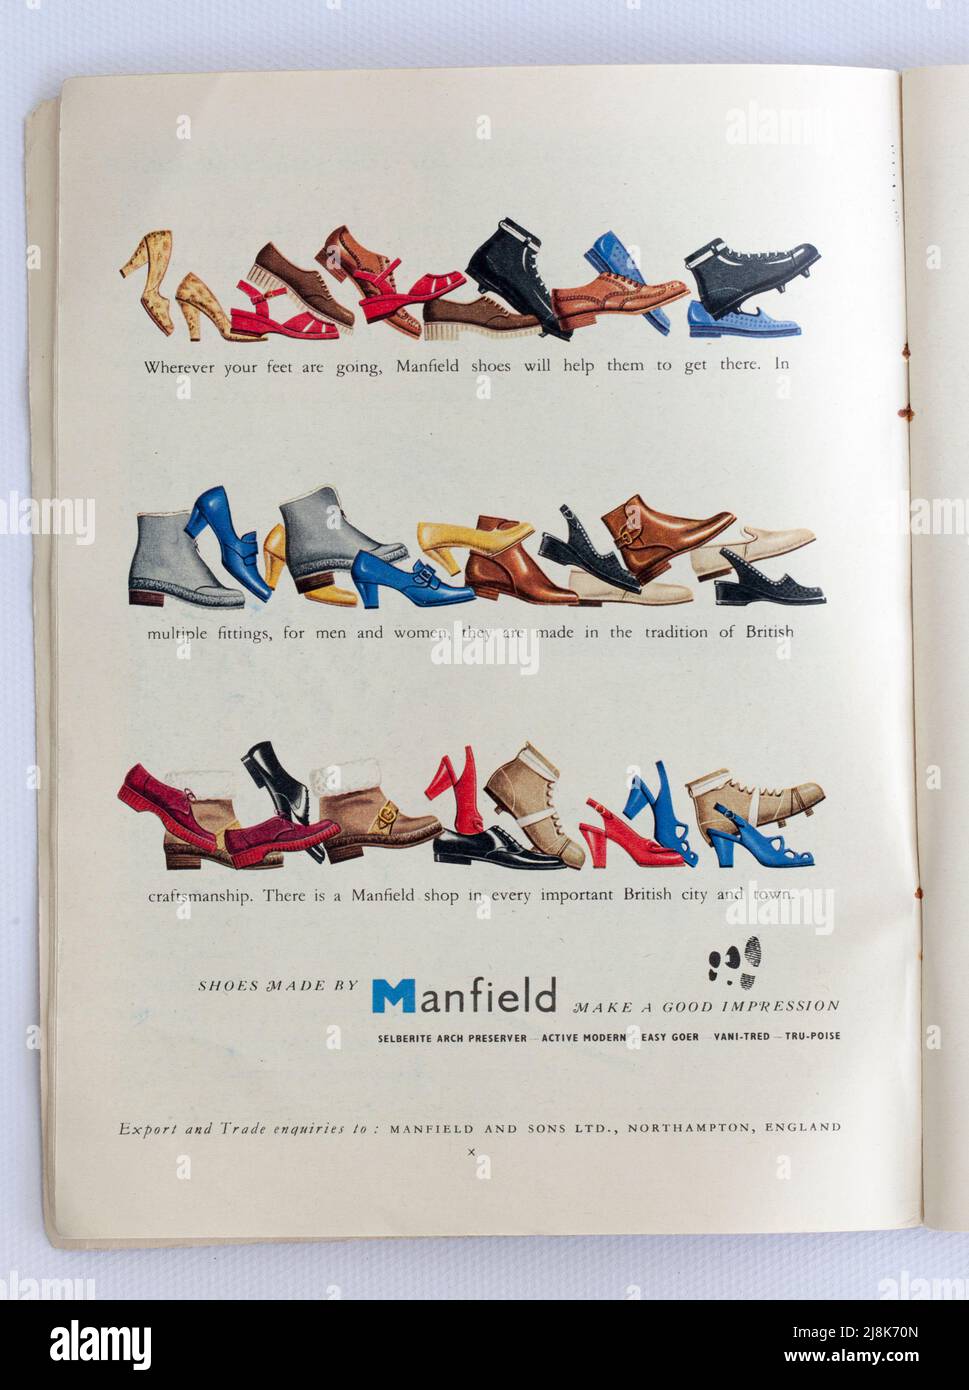 Old 1950s British Advertising for Manfield Shoes Stockfoto